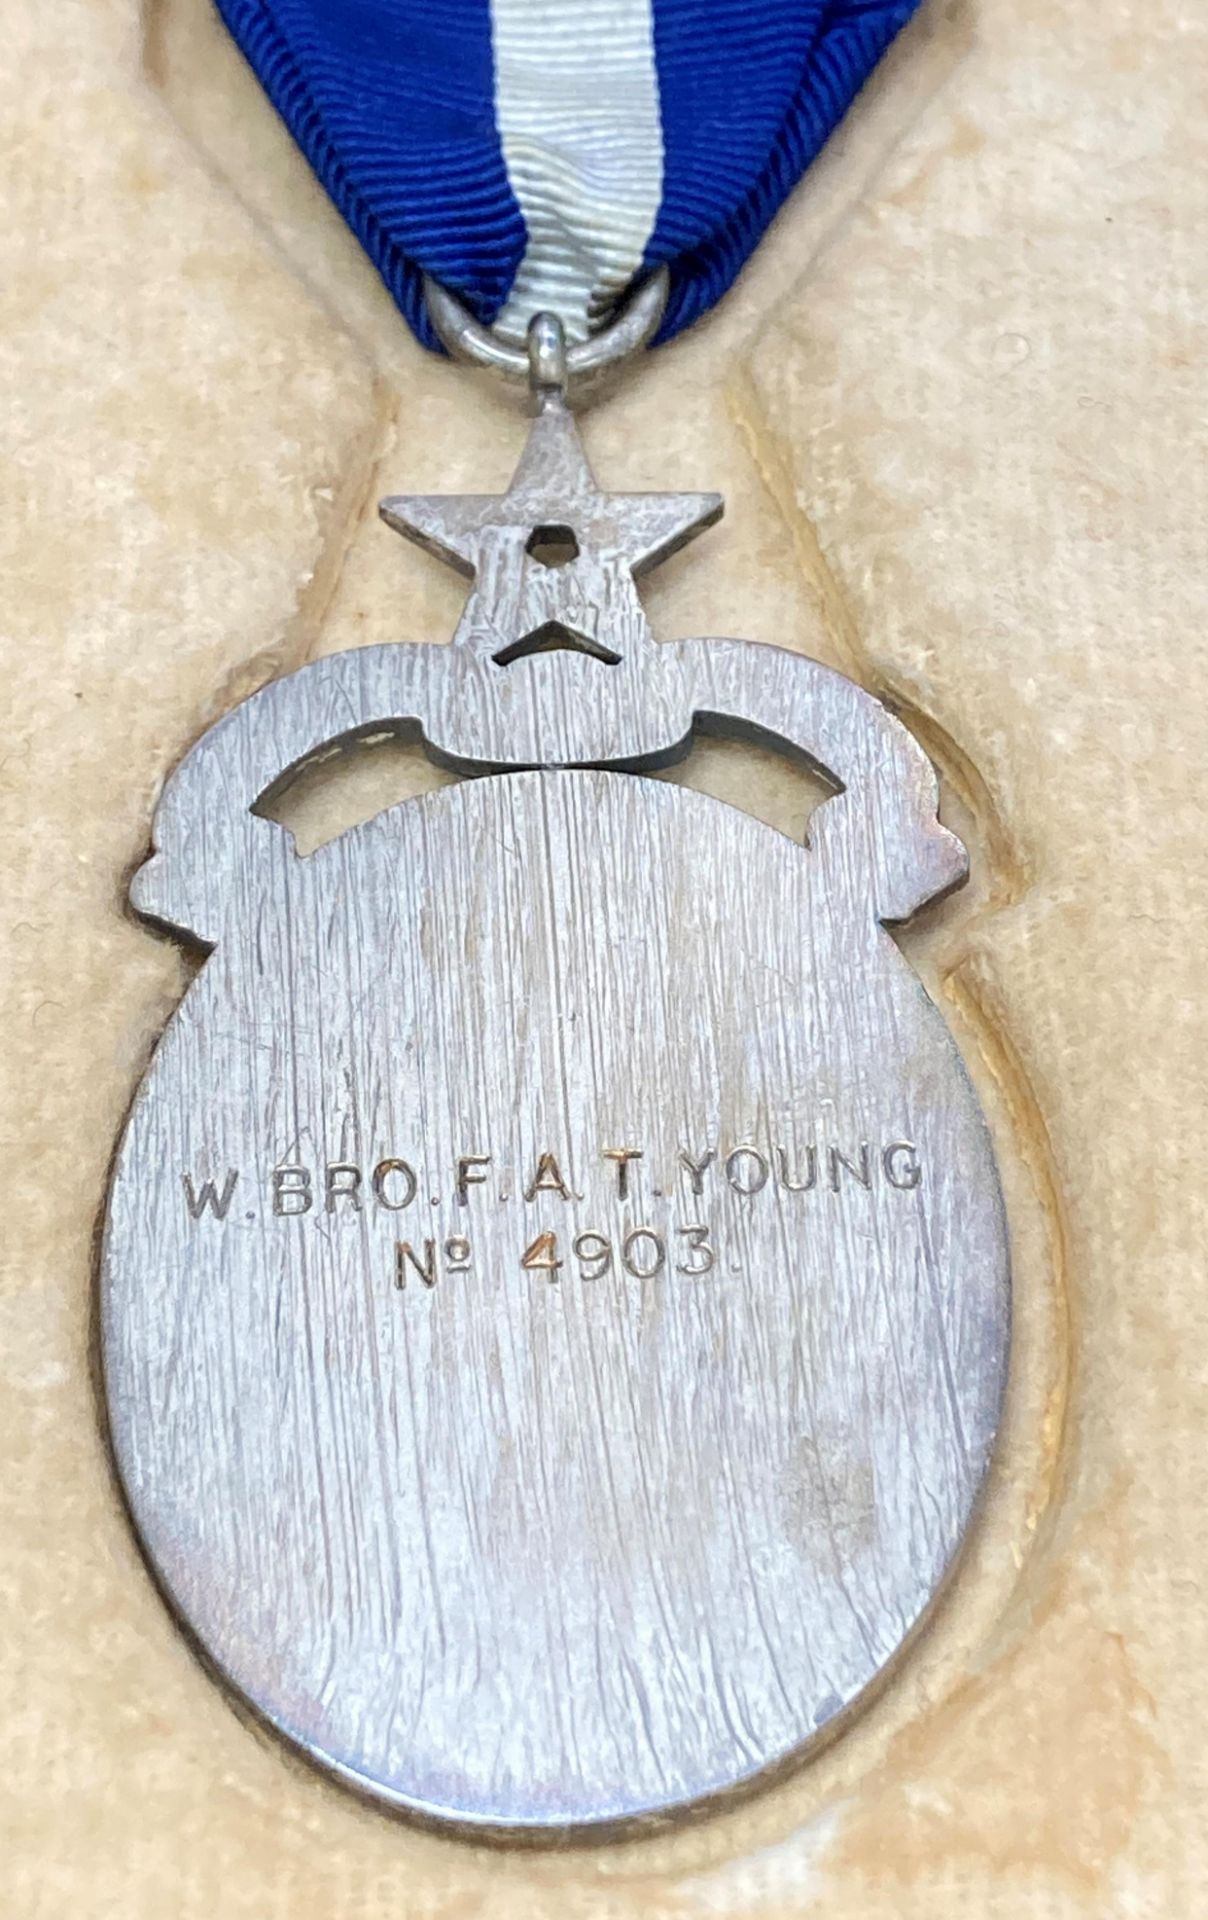 Masonic jewel in named fitted box of issue named to W. Bro. F.A.T. Young, no. - Image 3 of 4